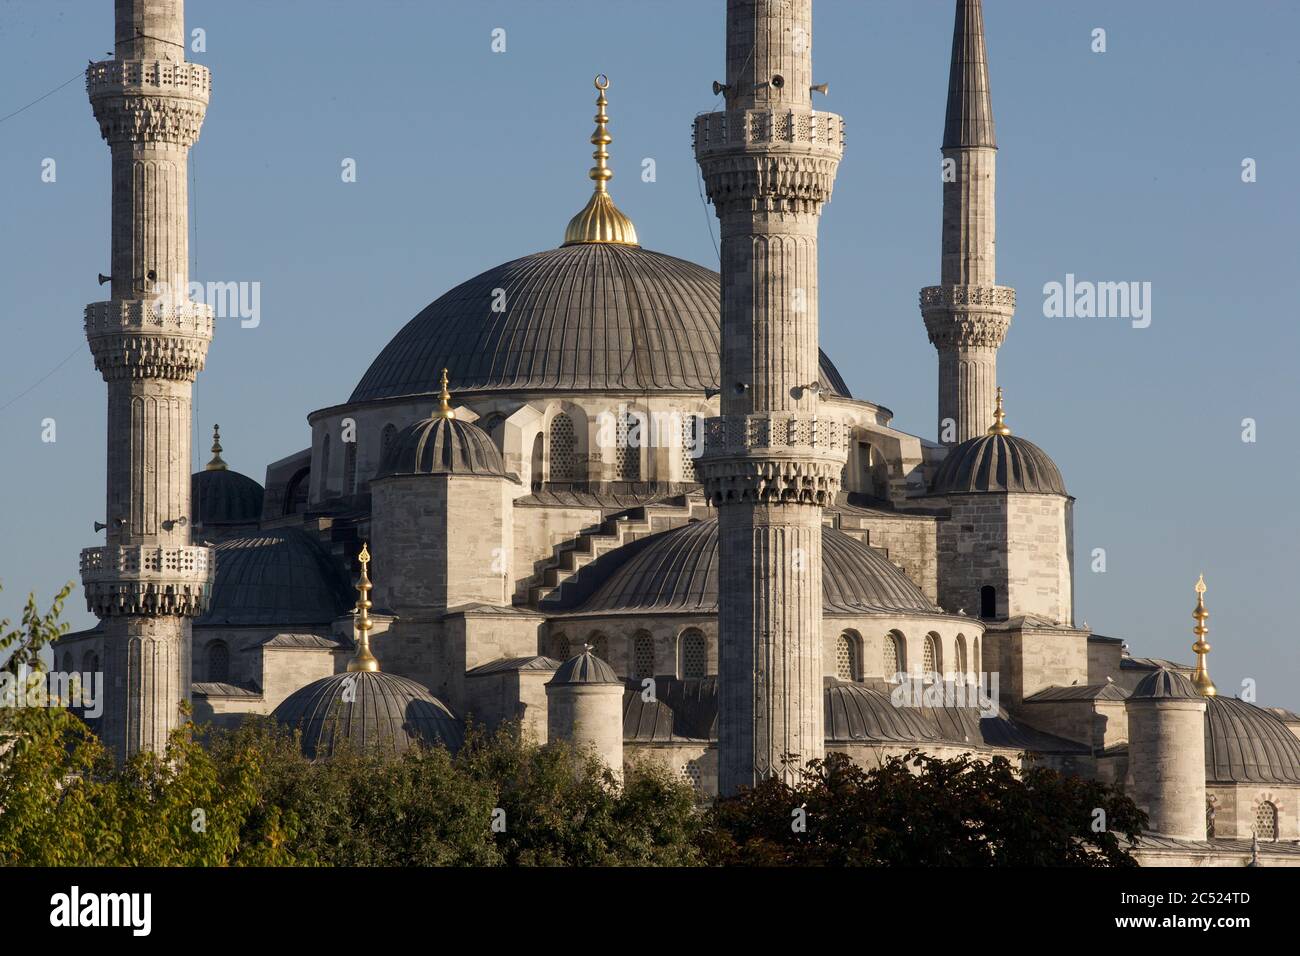 Istanbul: Sultan Ahmed Mosque / Blue Mosque Stock Photo